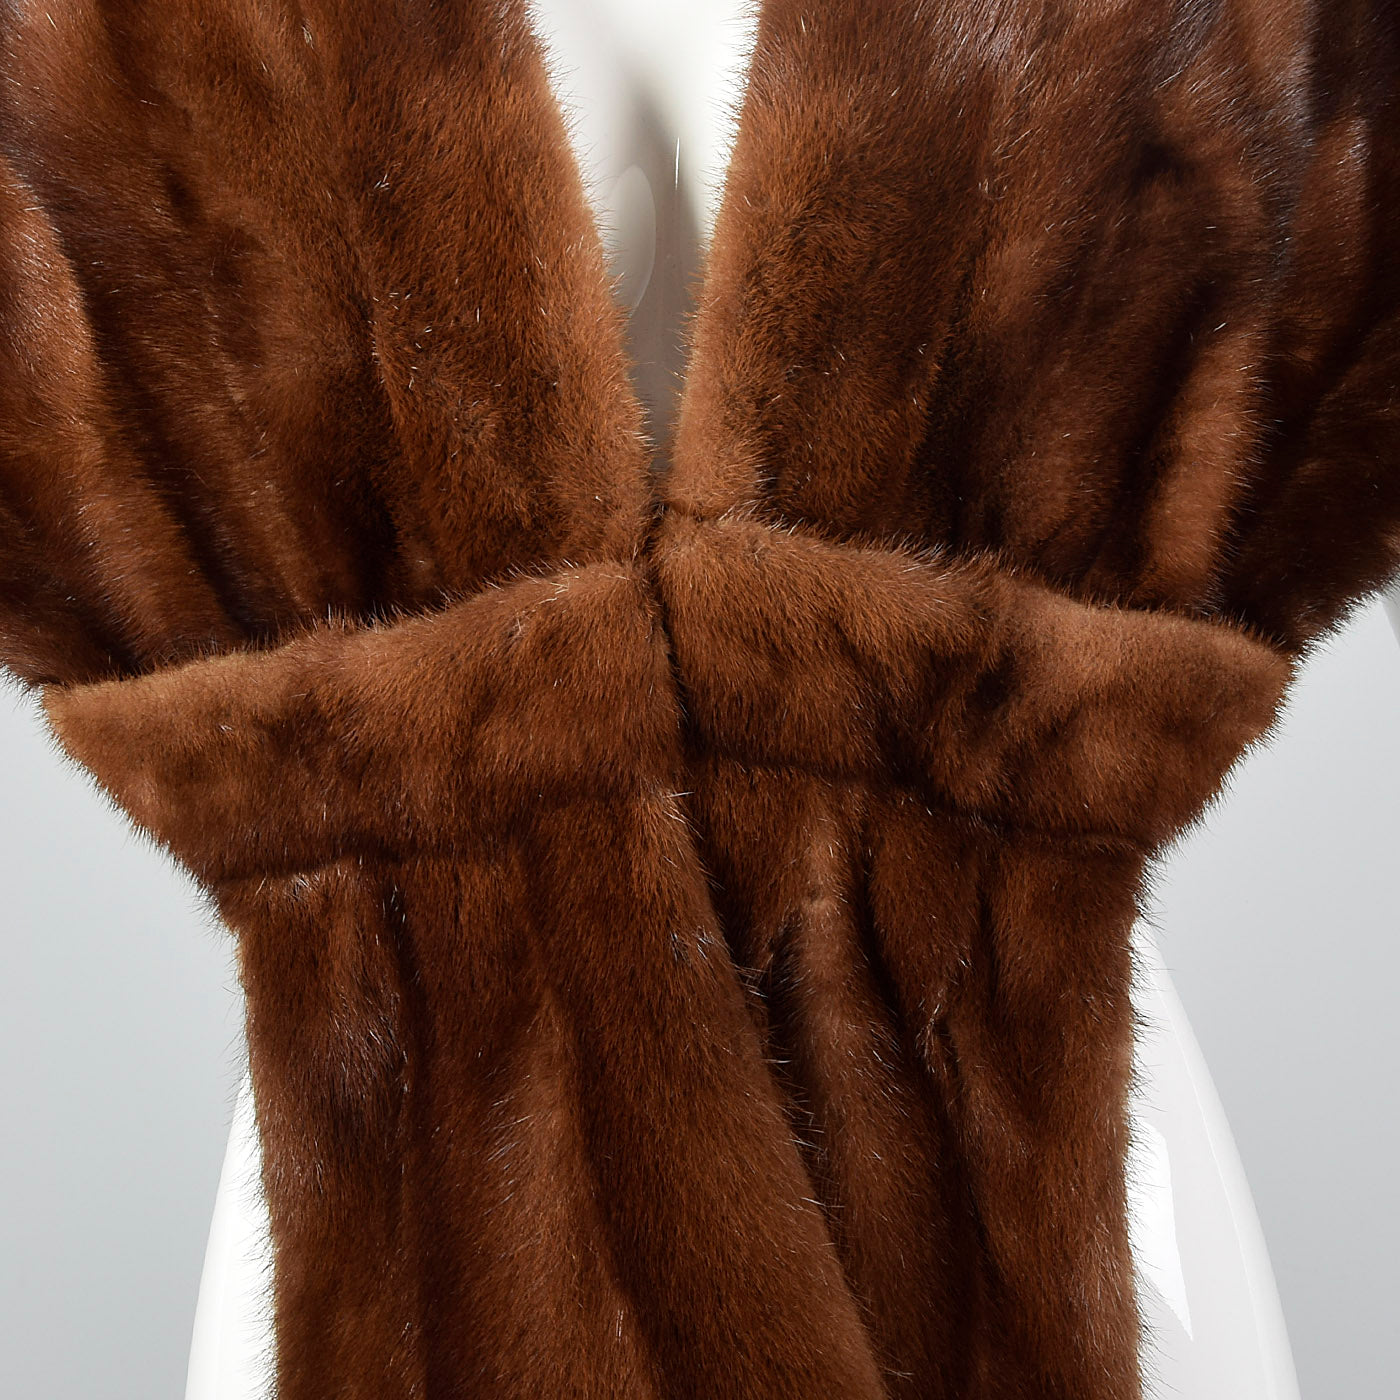 1950s Mink Stole with Scallop Edge